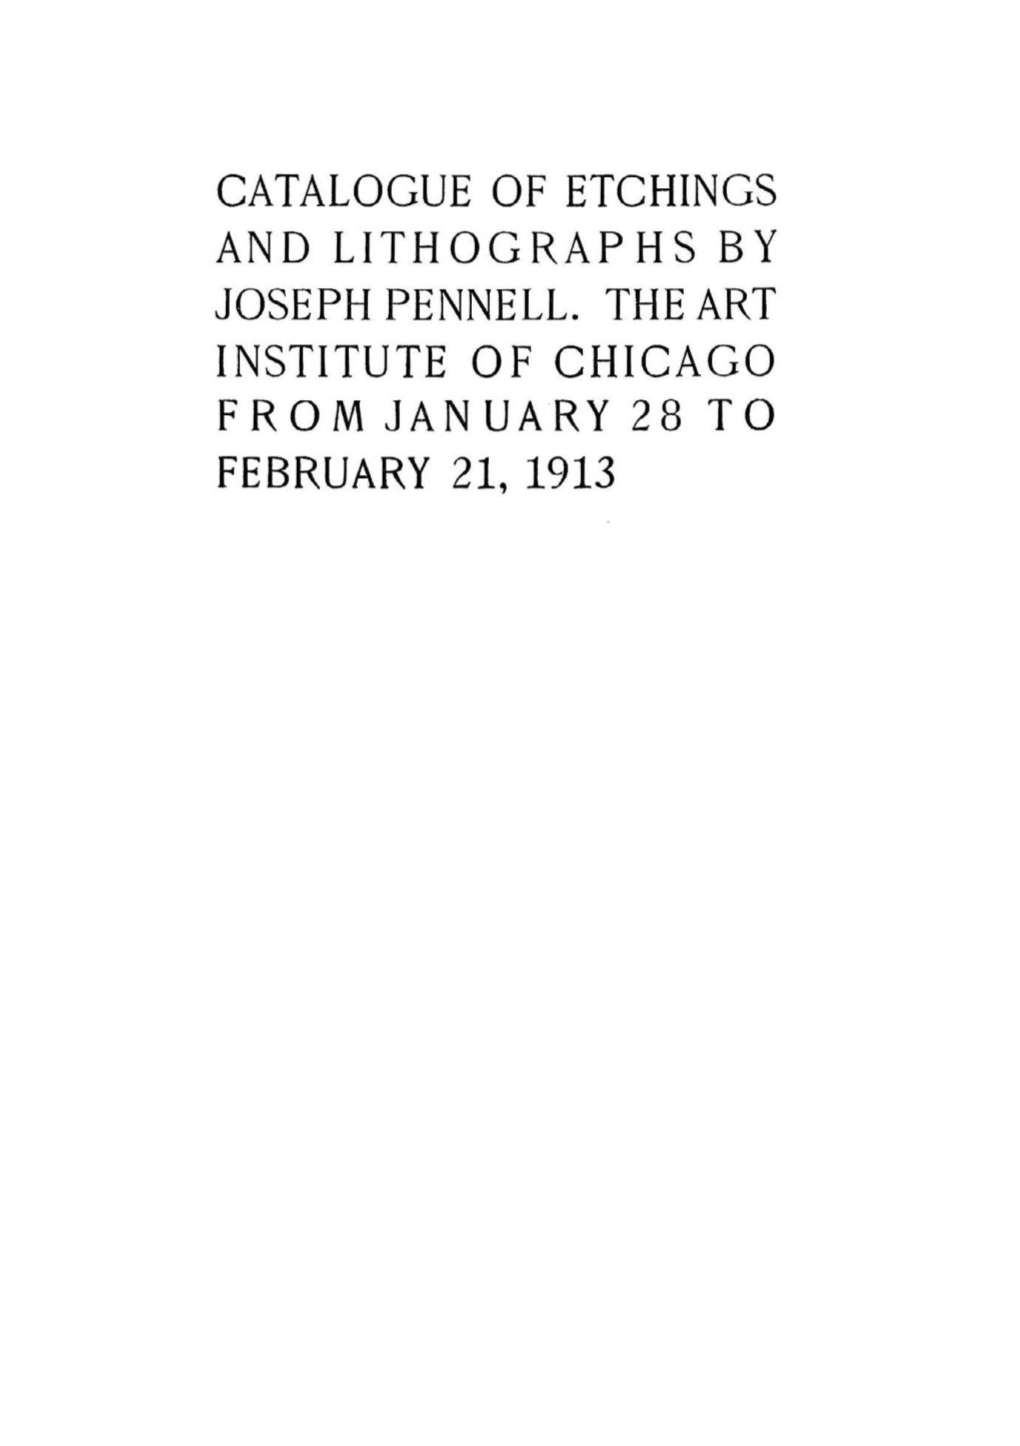 Catalogue of Etchings and Lithographs by Joseph Pennell